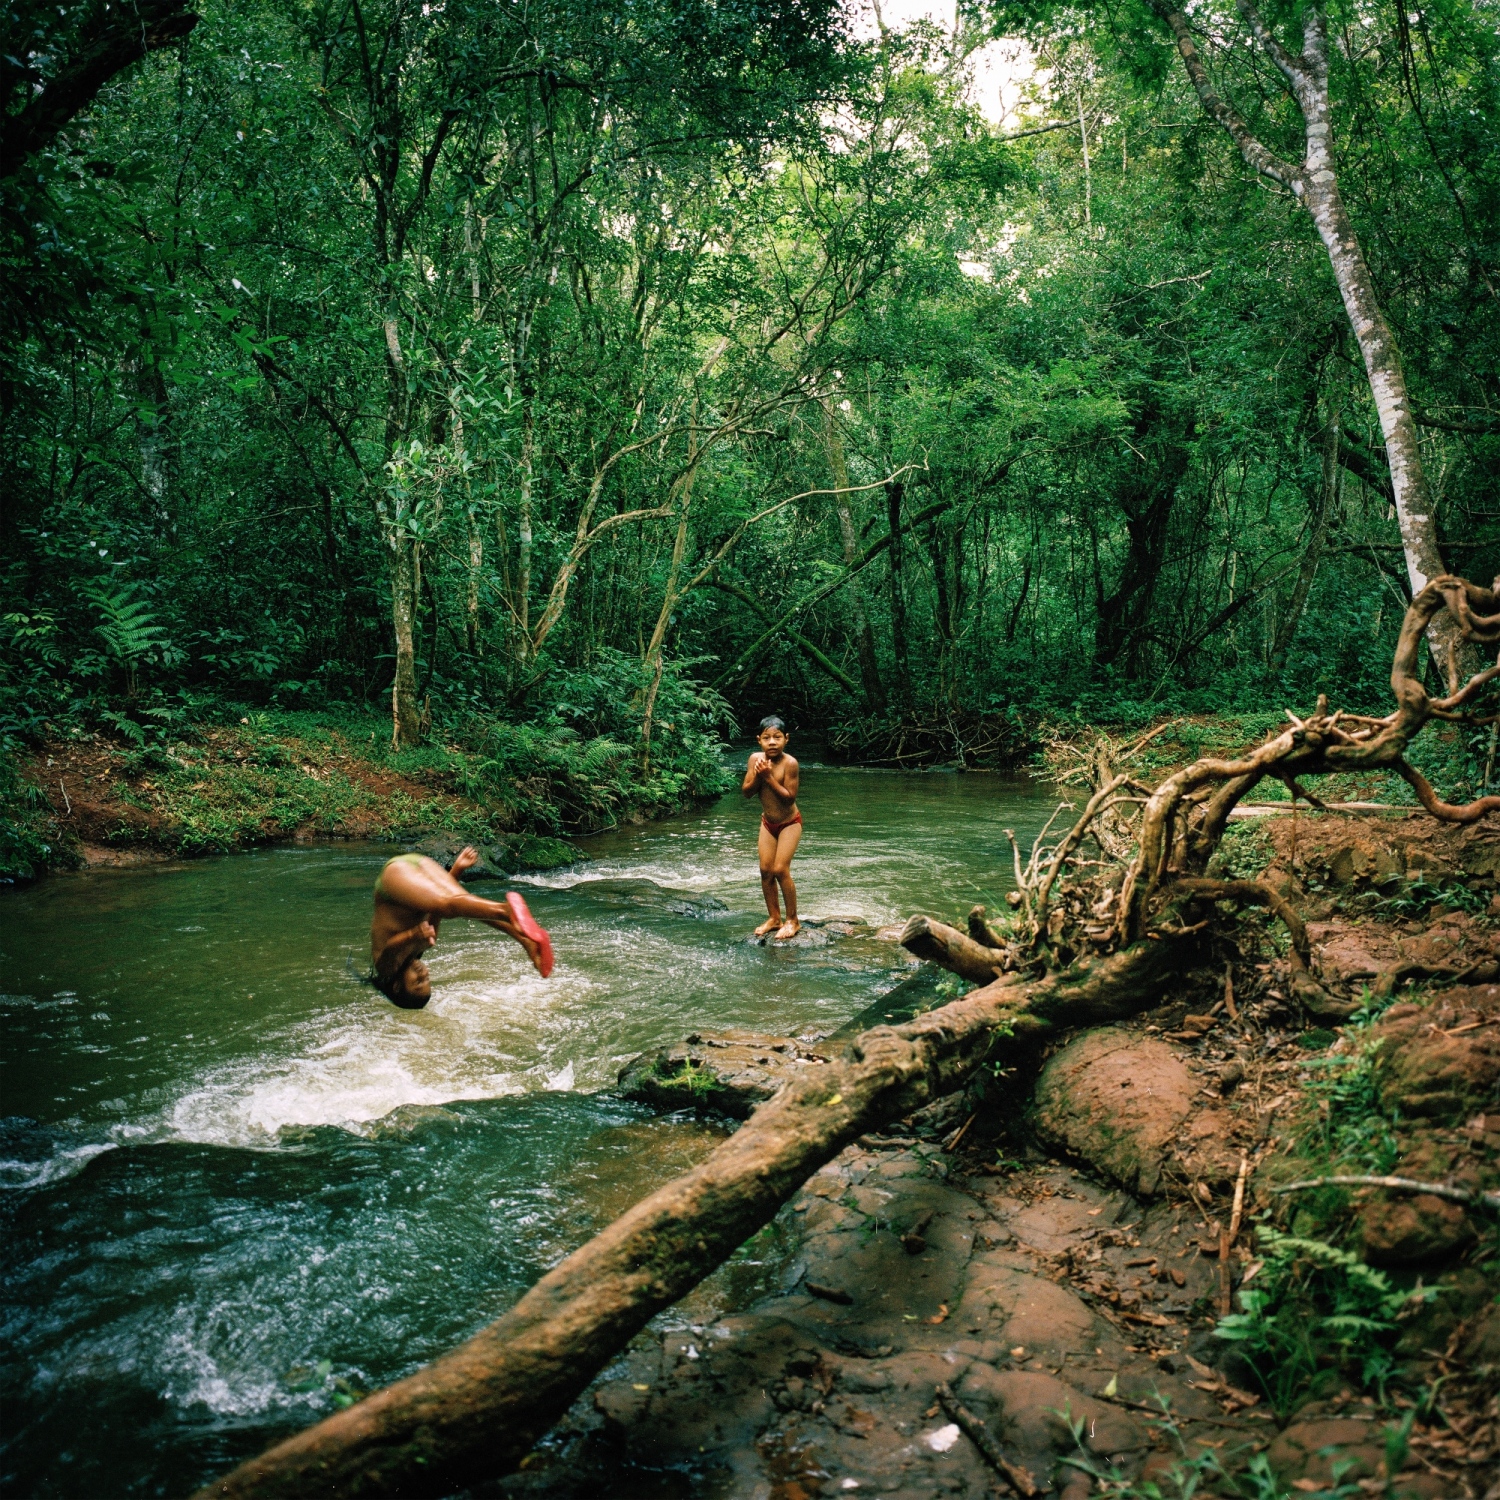 November 30, 2016.&nbsp; Tamil Flores, 9, left, and her brother Hudson Flores, 6, play in a stream in an occupied village of Guaiuiry near Amambai Indigenous Reserve in Matto Grosso Du Sul, Brazil. The land which is owned by a farmer has been occupied by a group of Kaiowa Indigenous people. The farm owner killed the Chief of the community, Nizio Gomes, with hired security forces a year ago. The community has not had a single suicide. and they attribute that to their practice of cultural customs to ward off bed sprits.